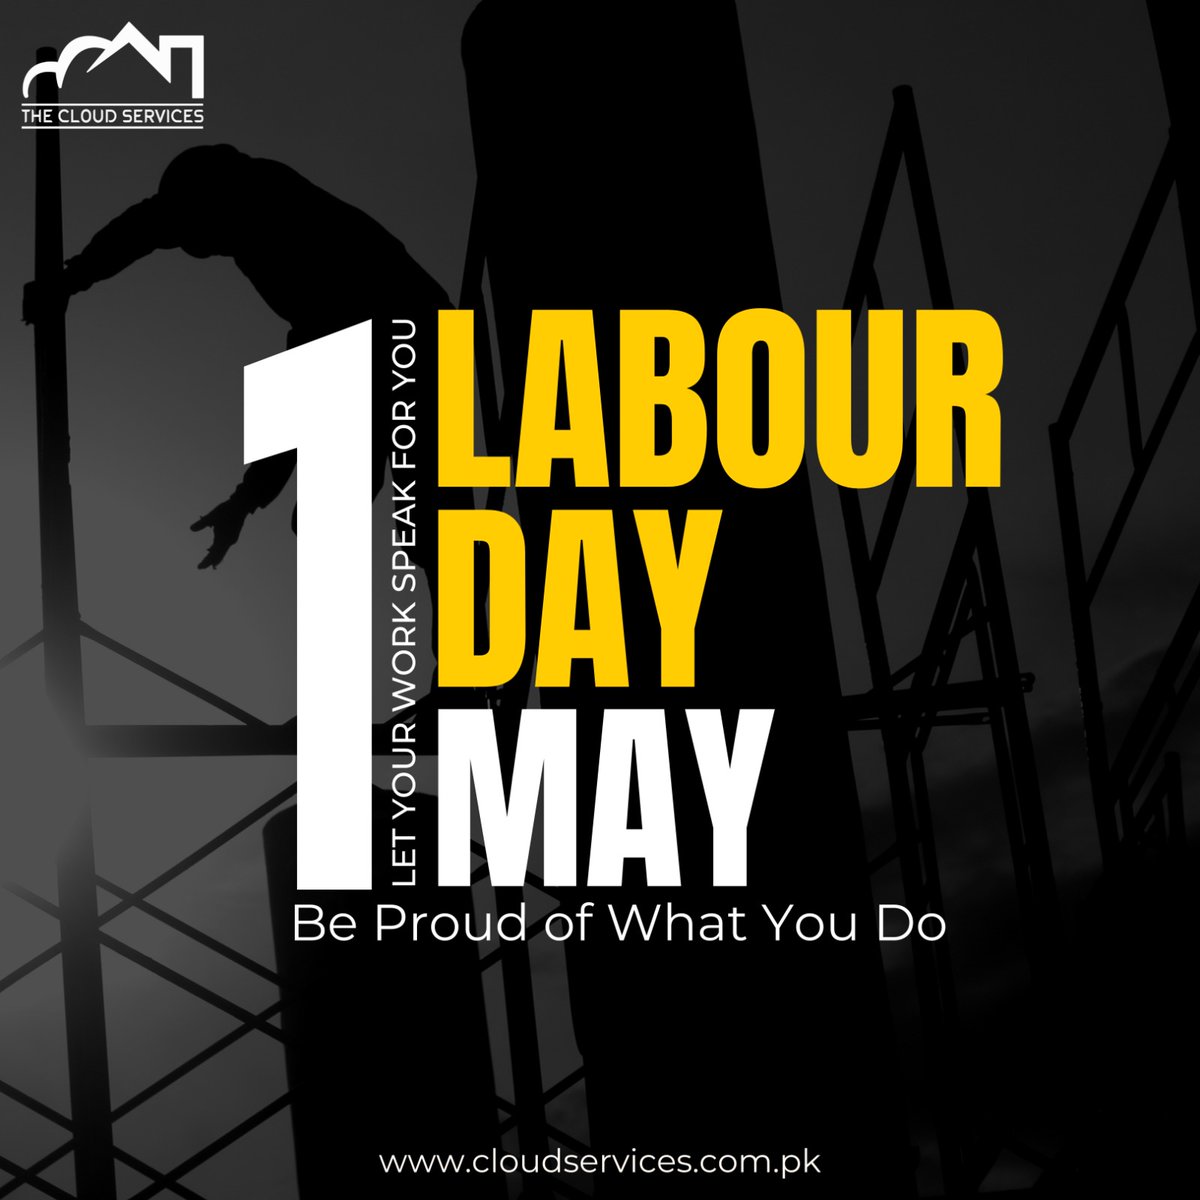 'Let's take a moment to appreciate the unsung heroes of our society - the workers who make it all possible. 𝗛𝗮𝗽𝗽𝘆 𝗟𝗮𝗯𝗼𝘂𝗿 𝗗𝗮𝘆!'
#labourday #labourchallenge #labourlaw #Labour #heroes #hardwork #DedicatedToExcellence #dedicatedtoserve